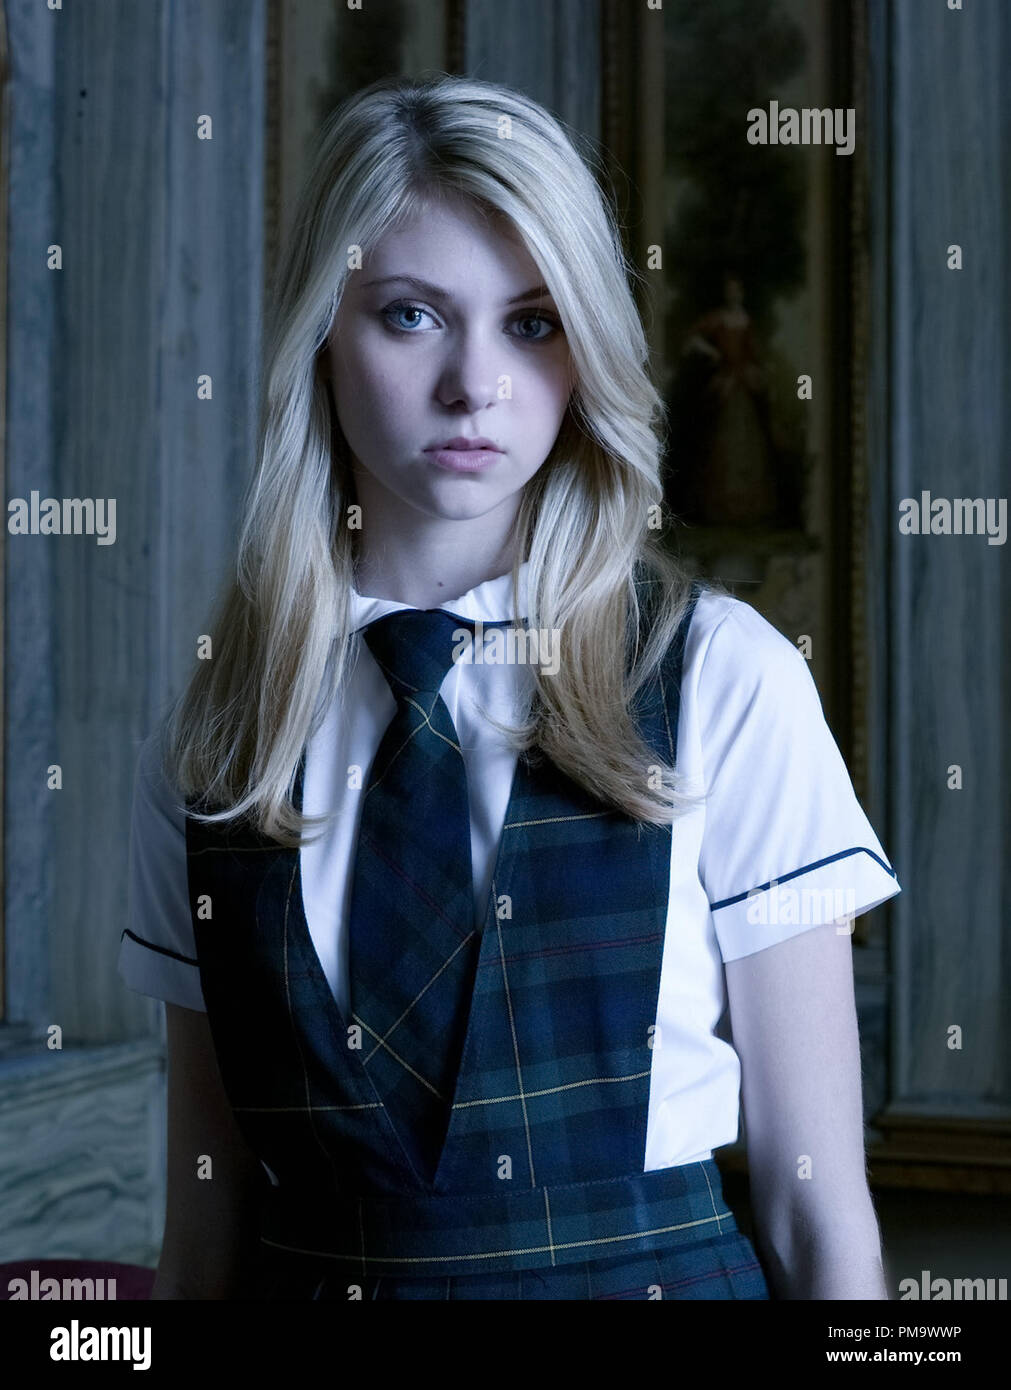 Gossip Girl Pictured: Taylor Momsen as Jenny Humphrey Photo Credit: Andrew Eccles / The CW © 2007 The CW Network, LLC. All Rights Reserved. Stock Photo